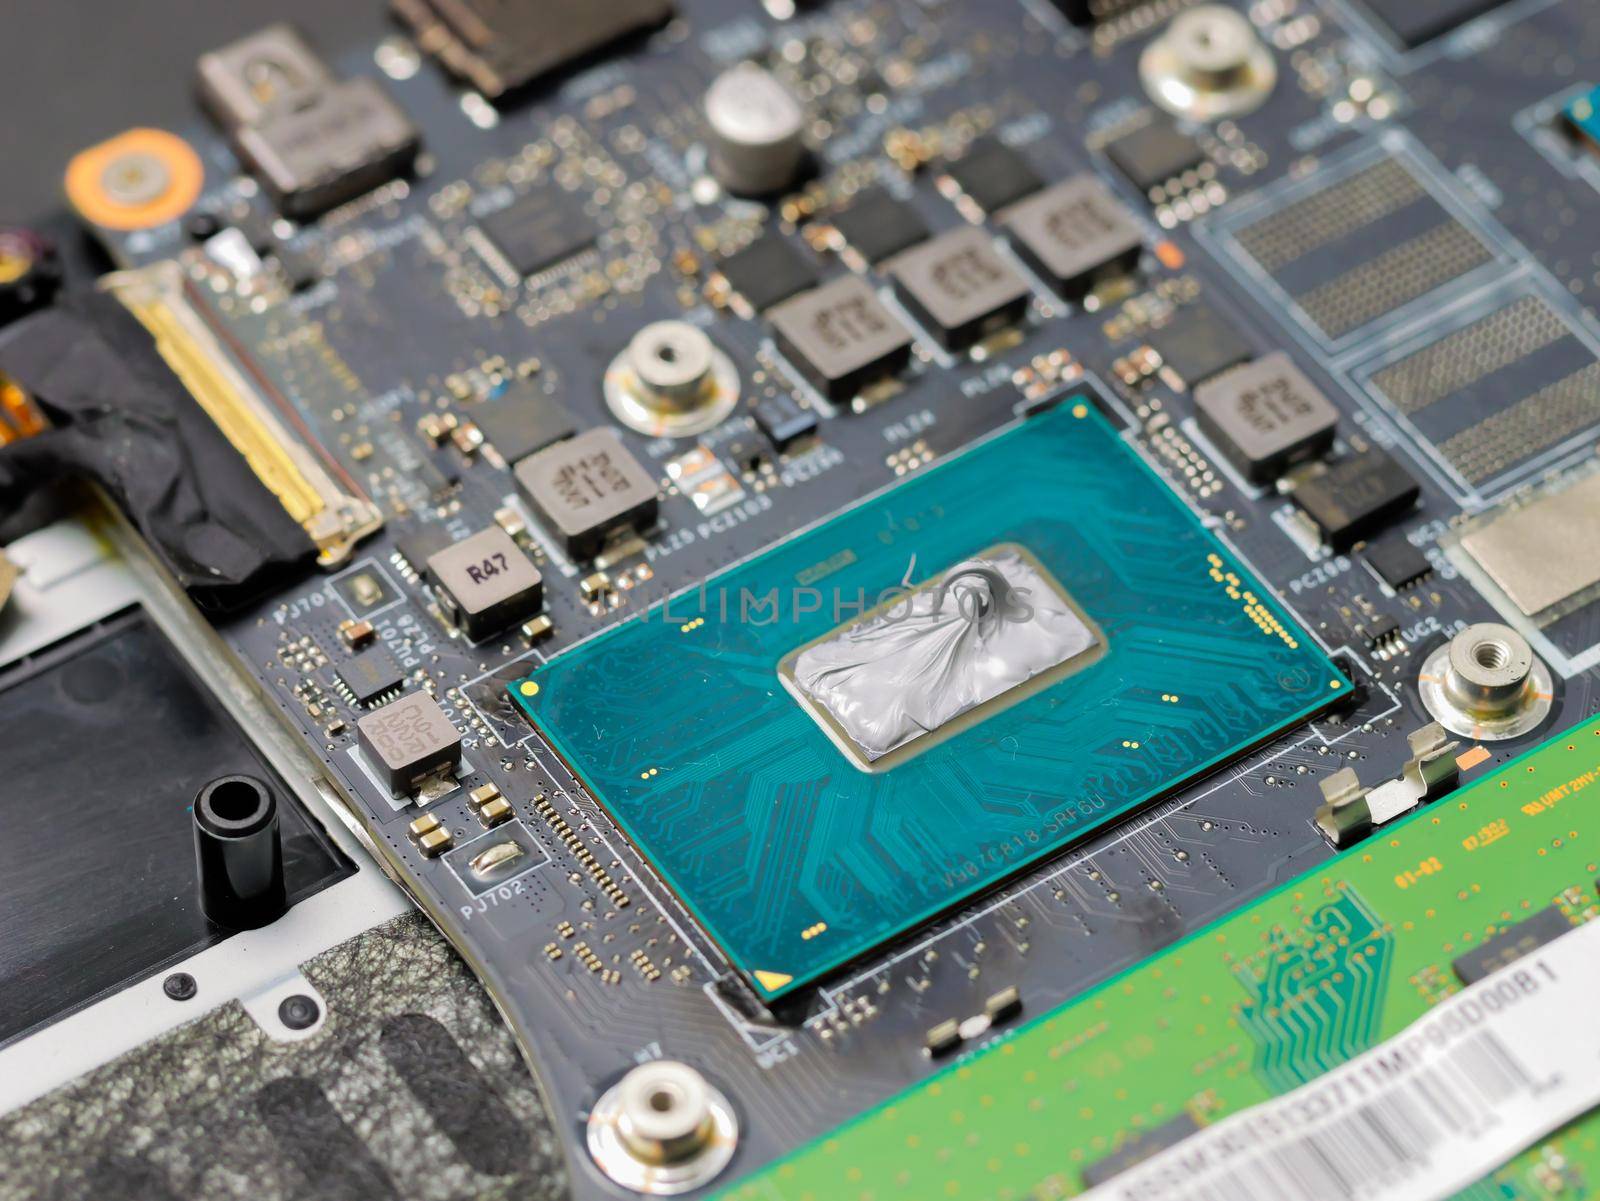 Thermal paste on the laptop processor. Computer literacy repair men hands, cooling the hot temperature of the laptop